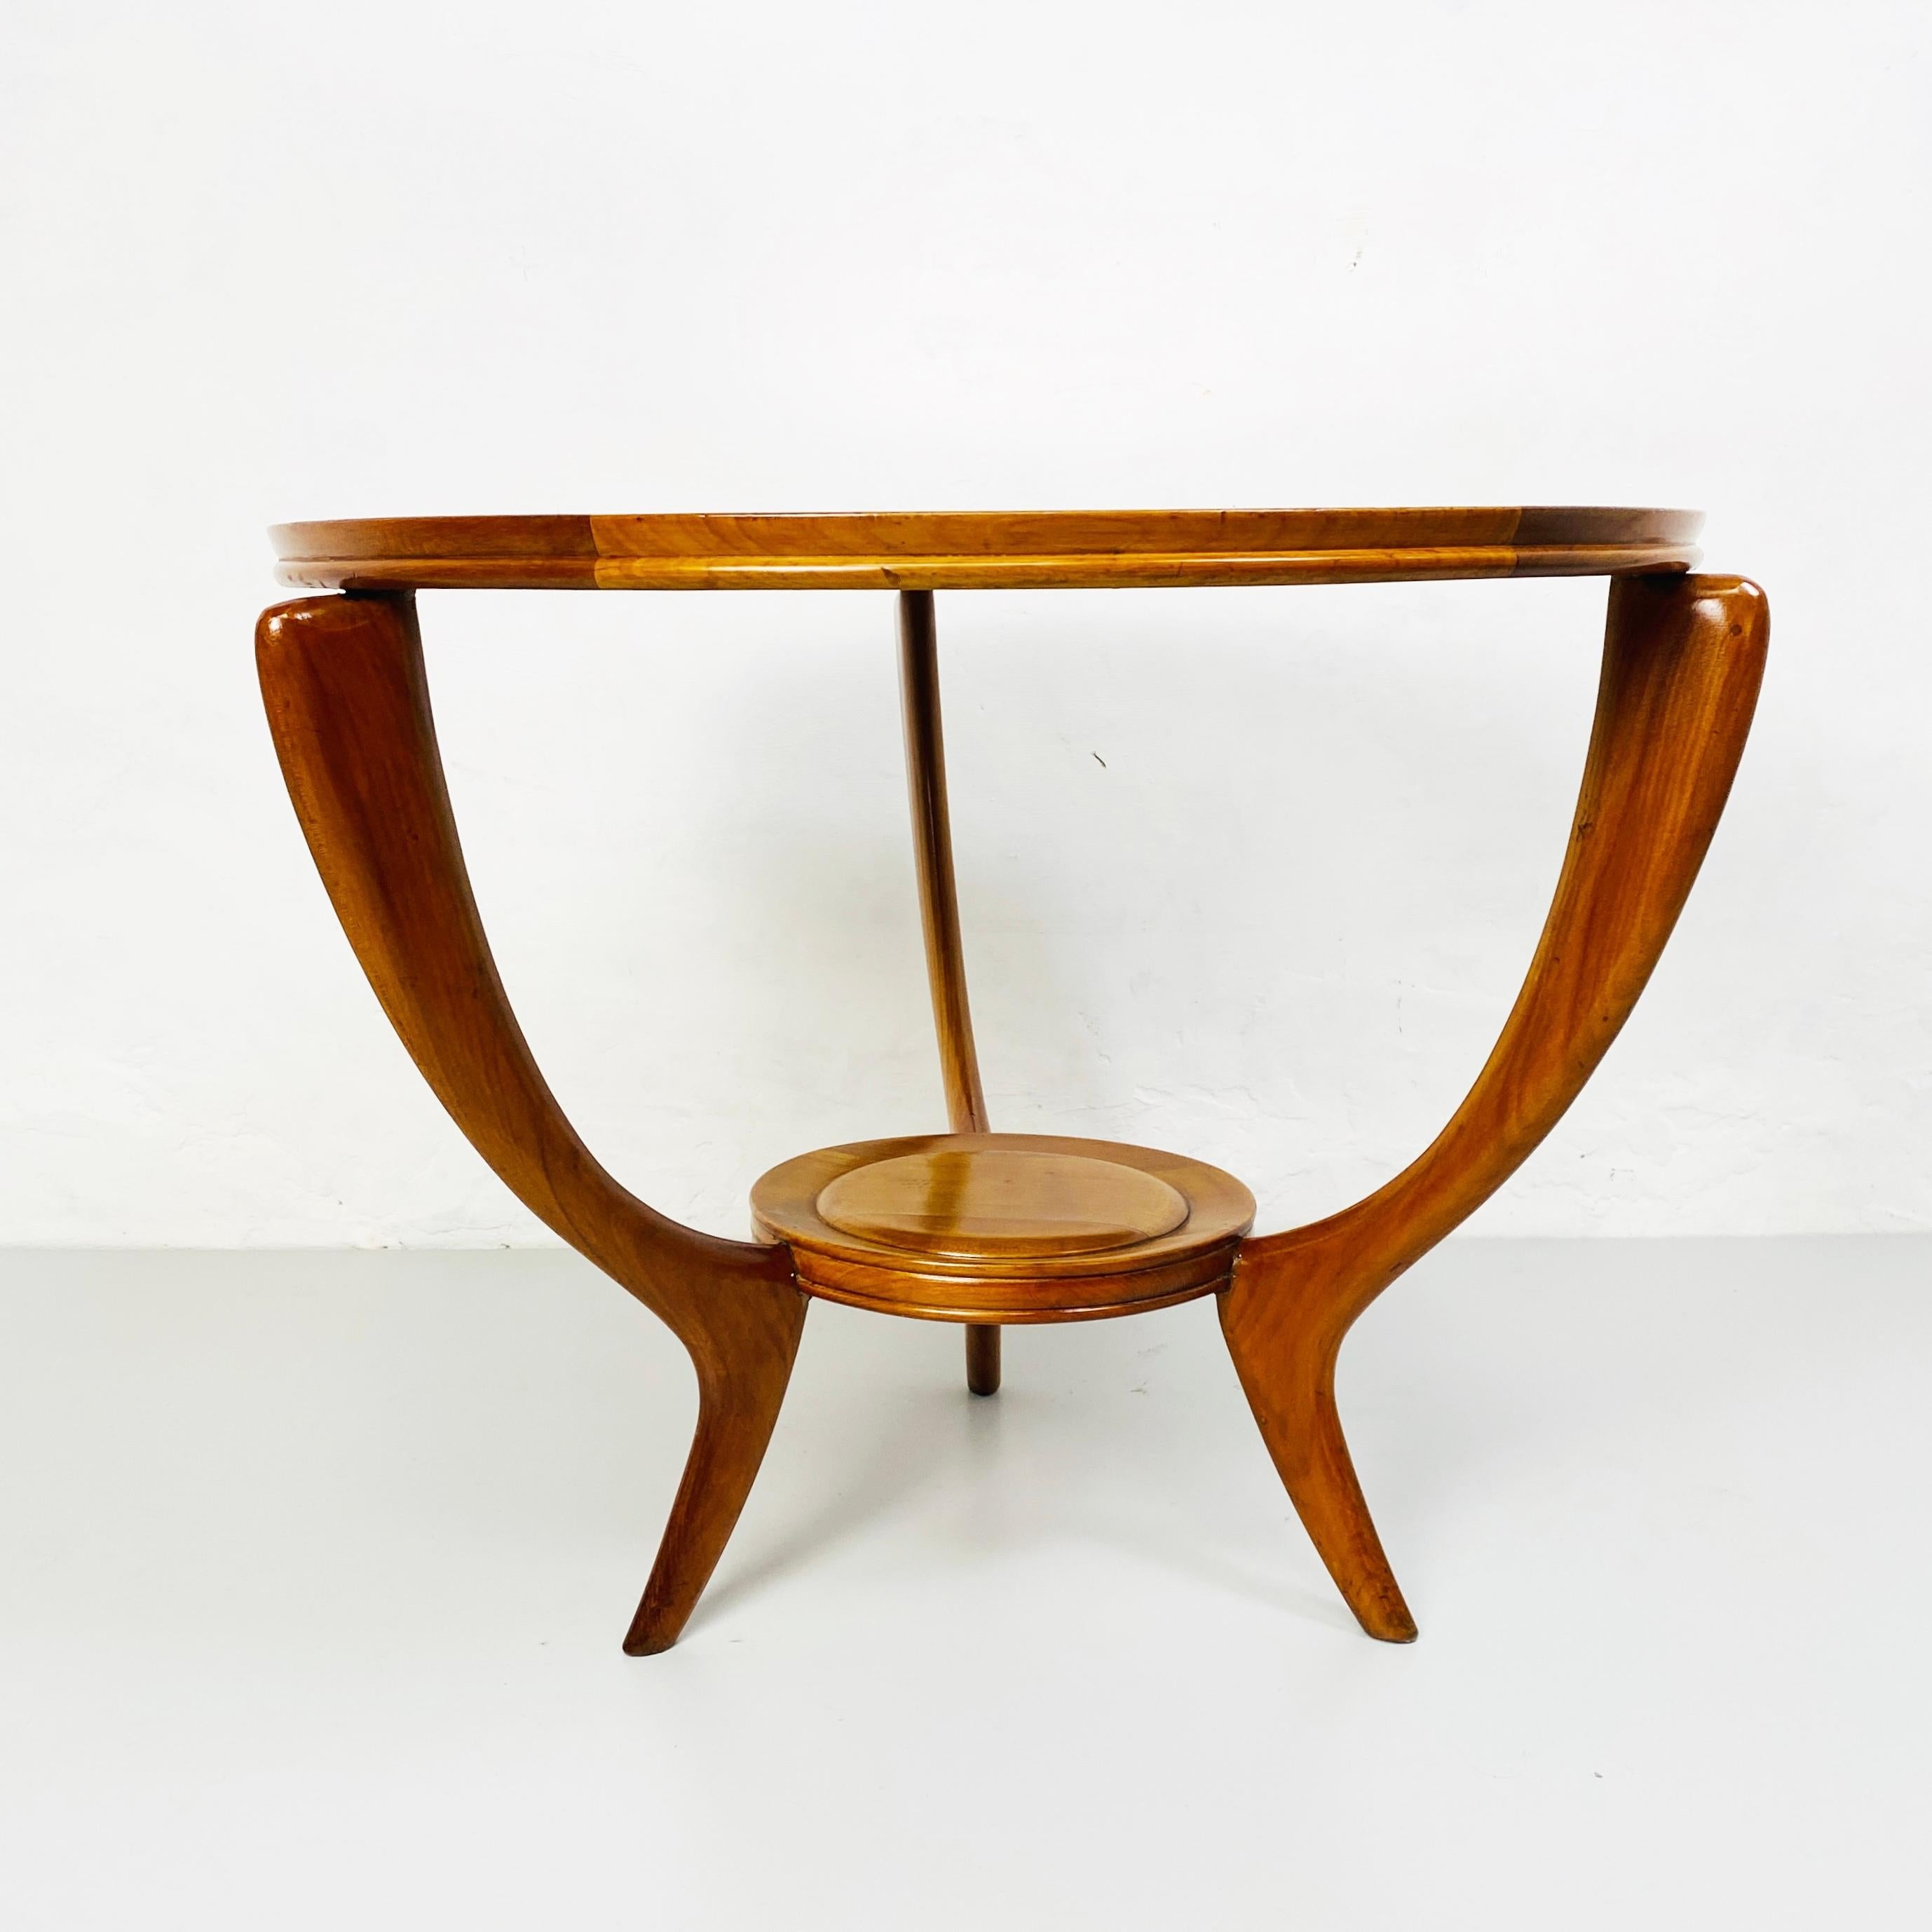 Italian Mid-Century Wood Round Table with Mirror, 1950s For Sale 2